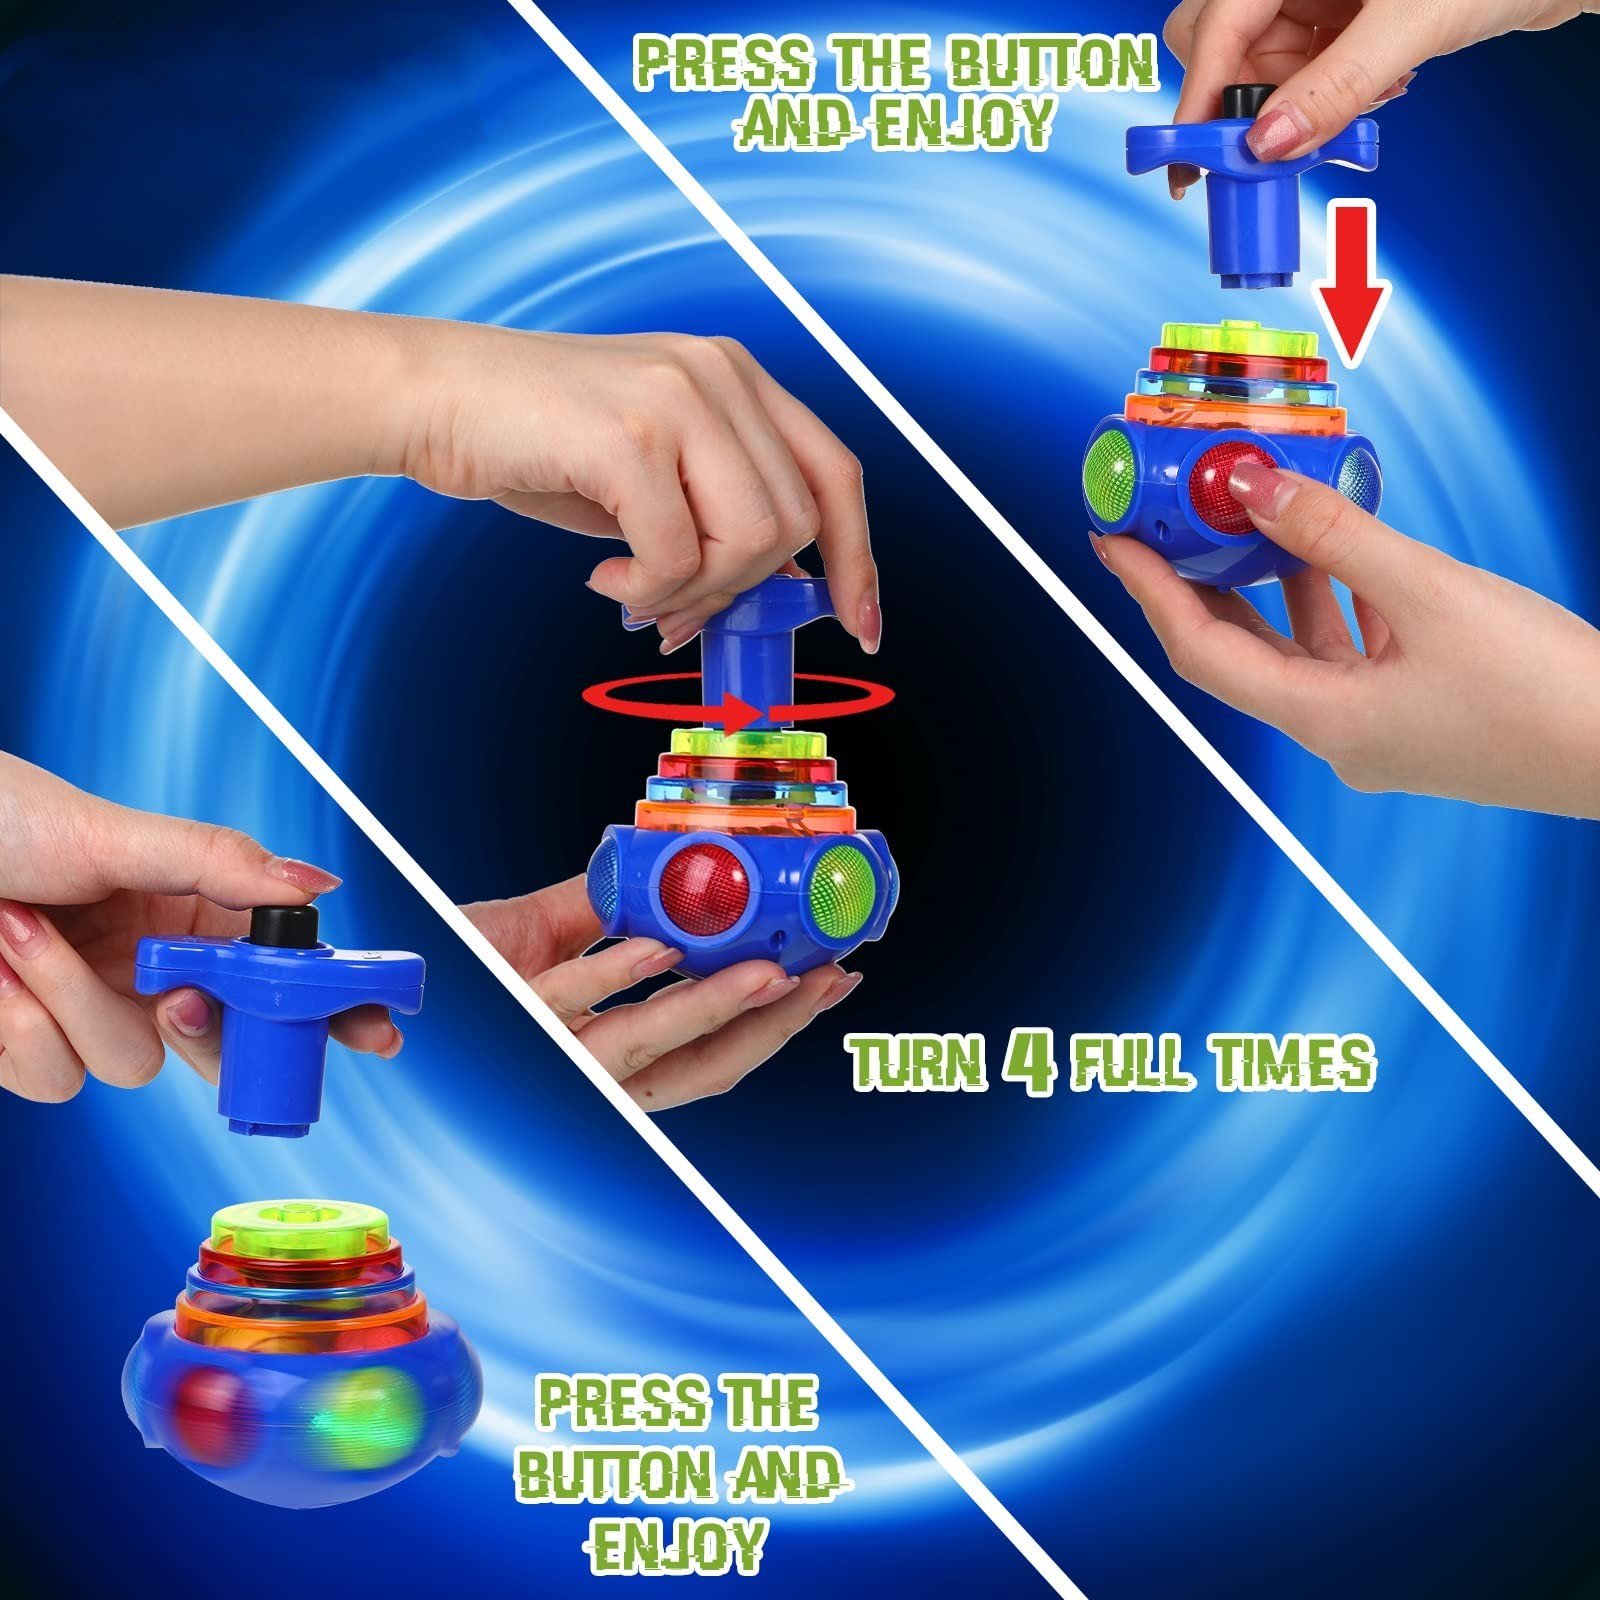 🎁Best Christmas Gift For Kids—Music Flashing Spinners Toy With Launcher